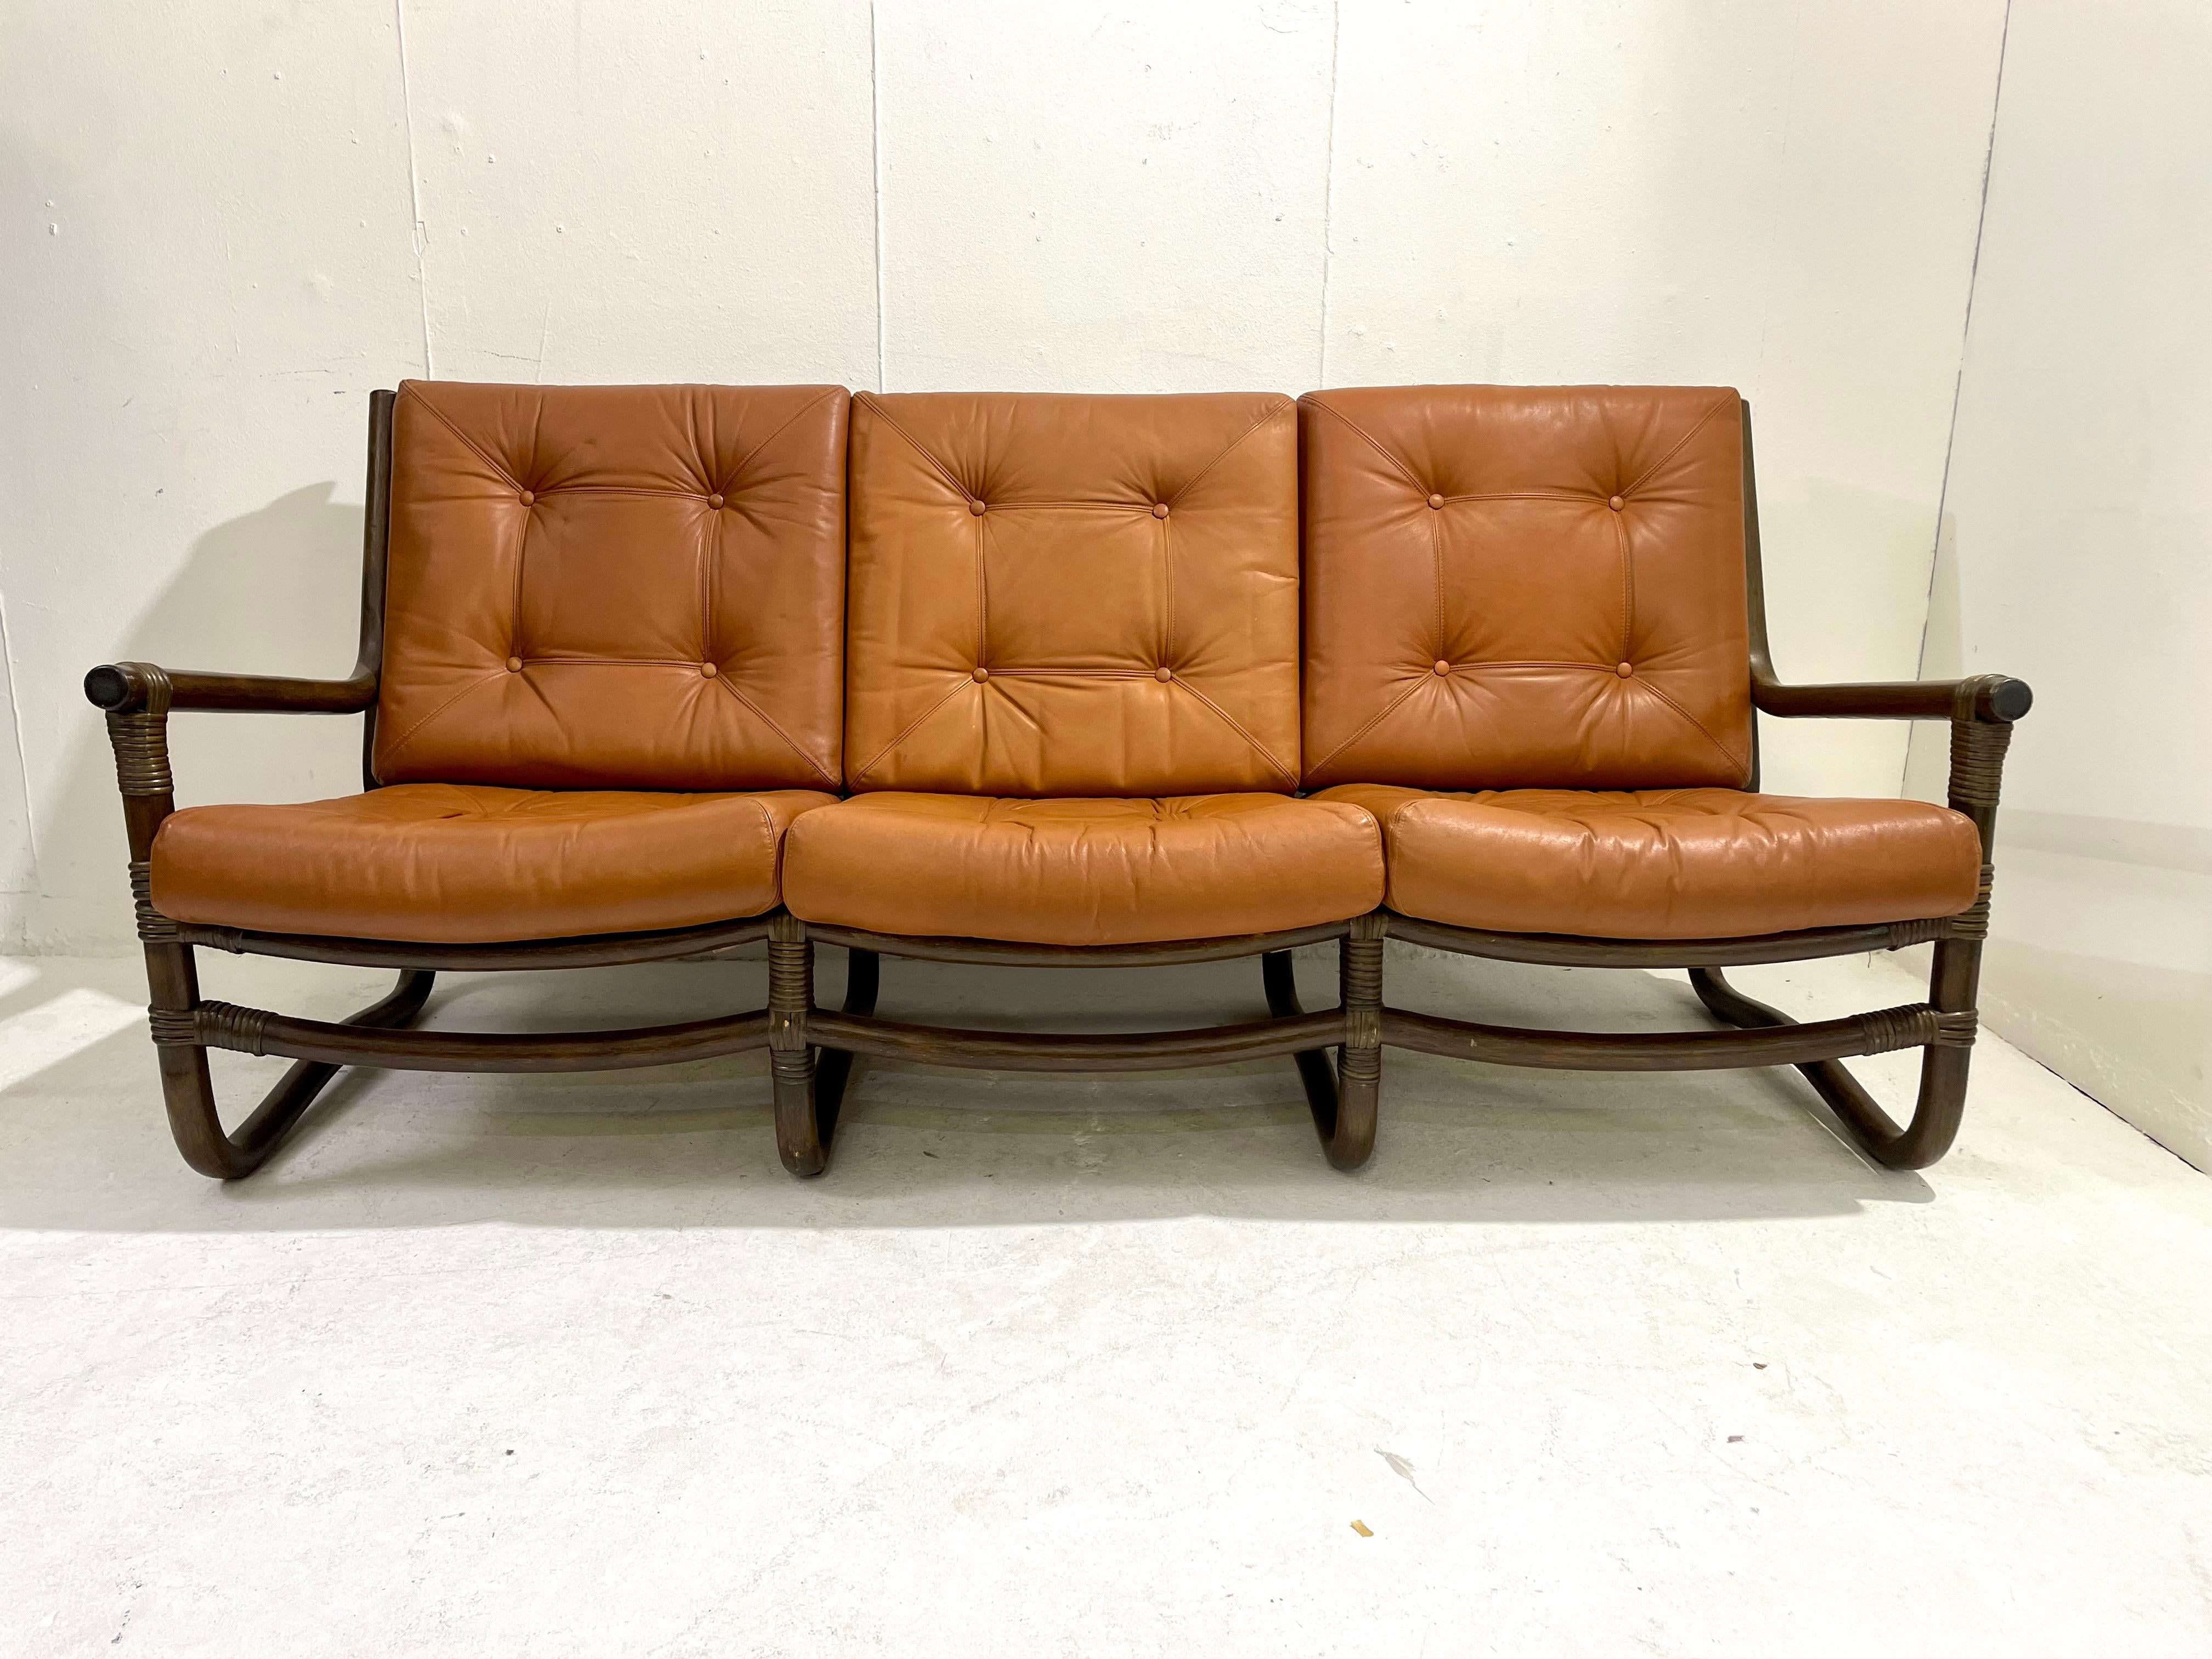 Late 20th Century Mid-Century Modern Rattan and Cognac Leather Sofa, Italy 1970s For Sale